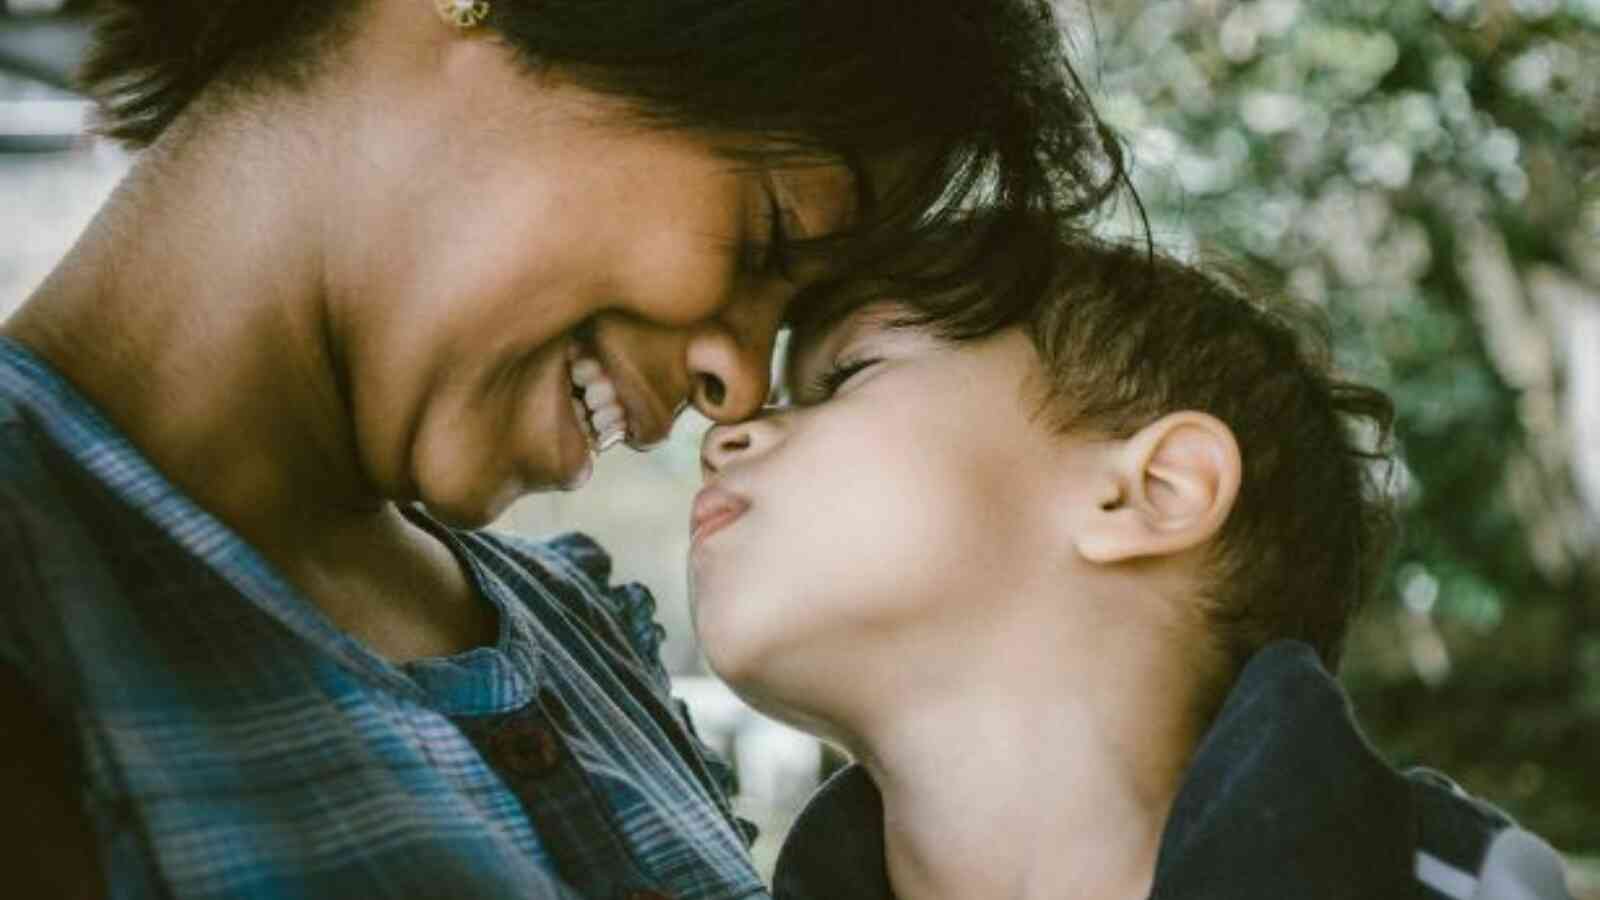 A young child and an adult female who appears to be the caregiver, are leaning into one another and touching noses. The adult female is smiling and both individuals have their eyes closed. The adult female has dark brown skin and the child has light brown skin.